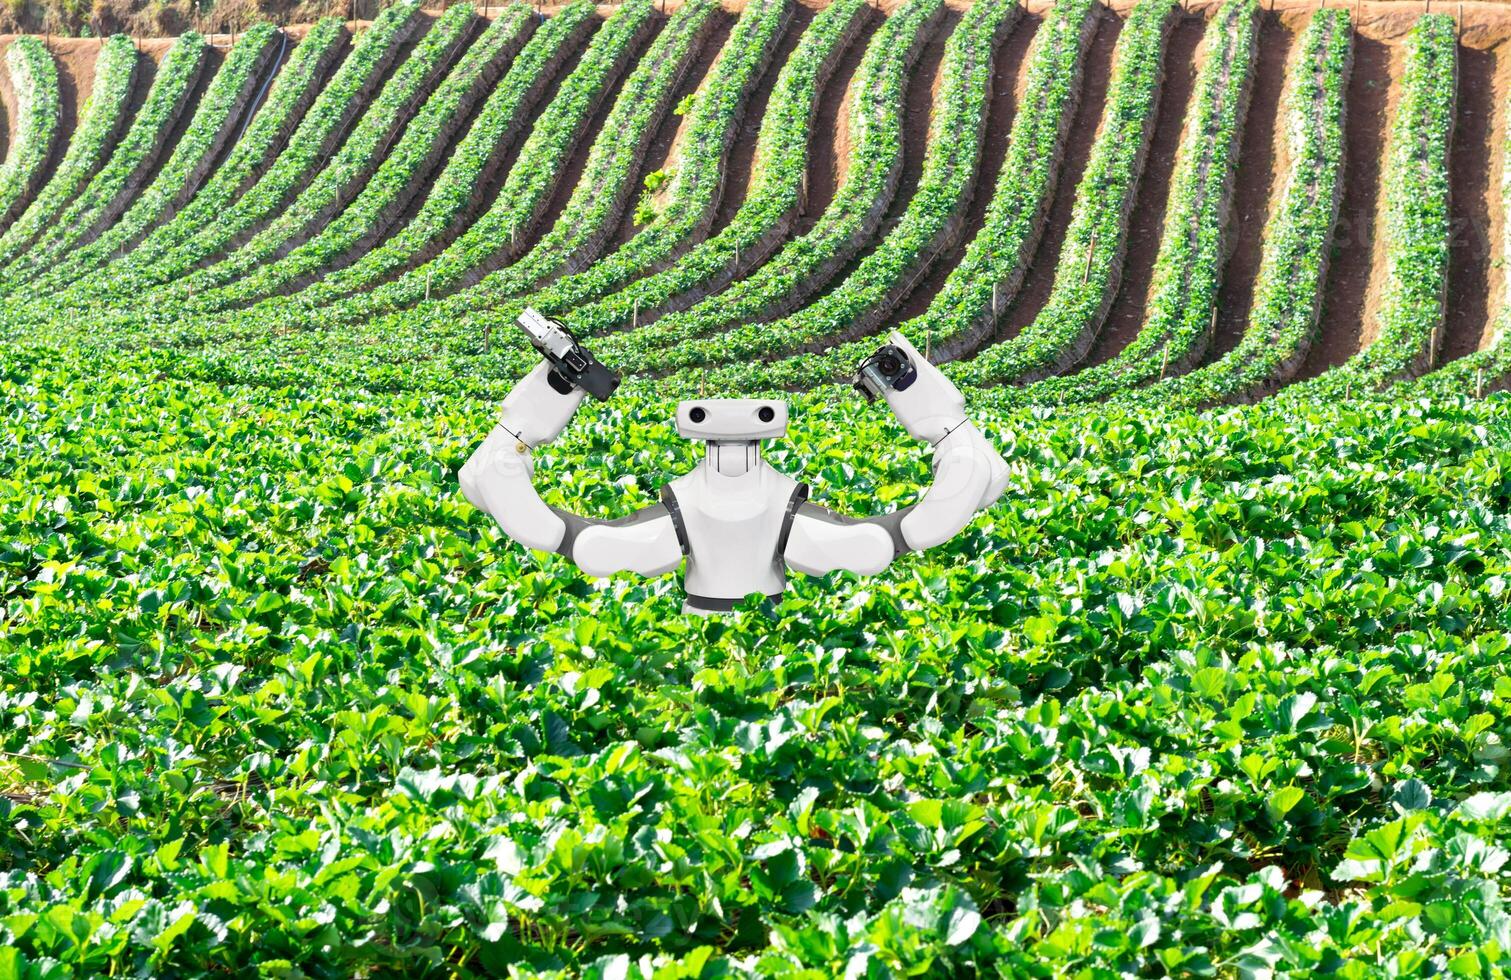 artificial intelligence the concept of using robots in agriculture photo